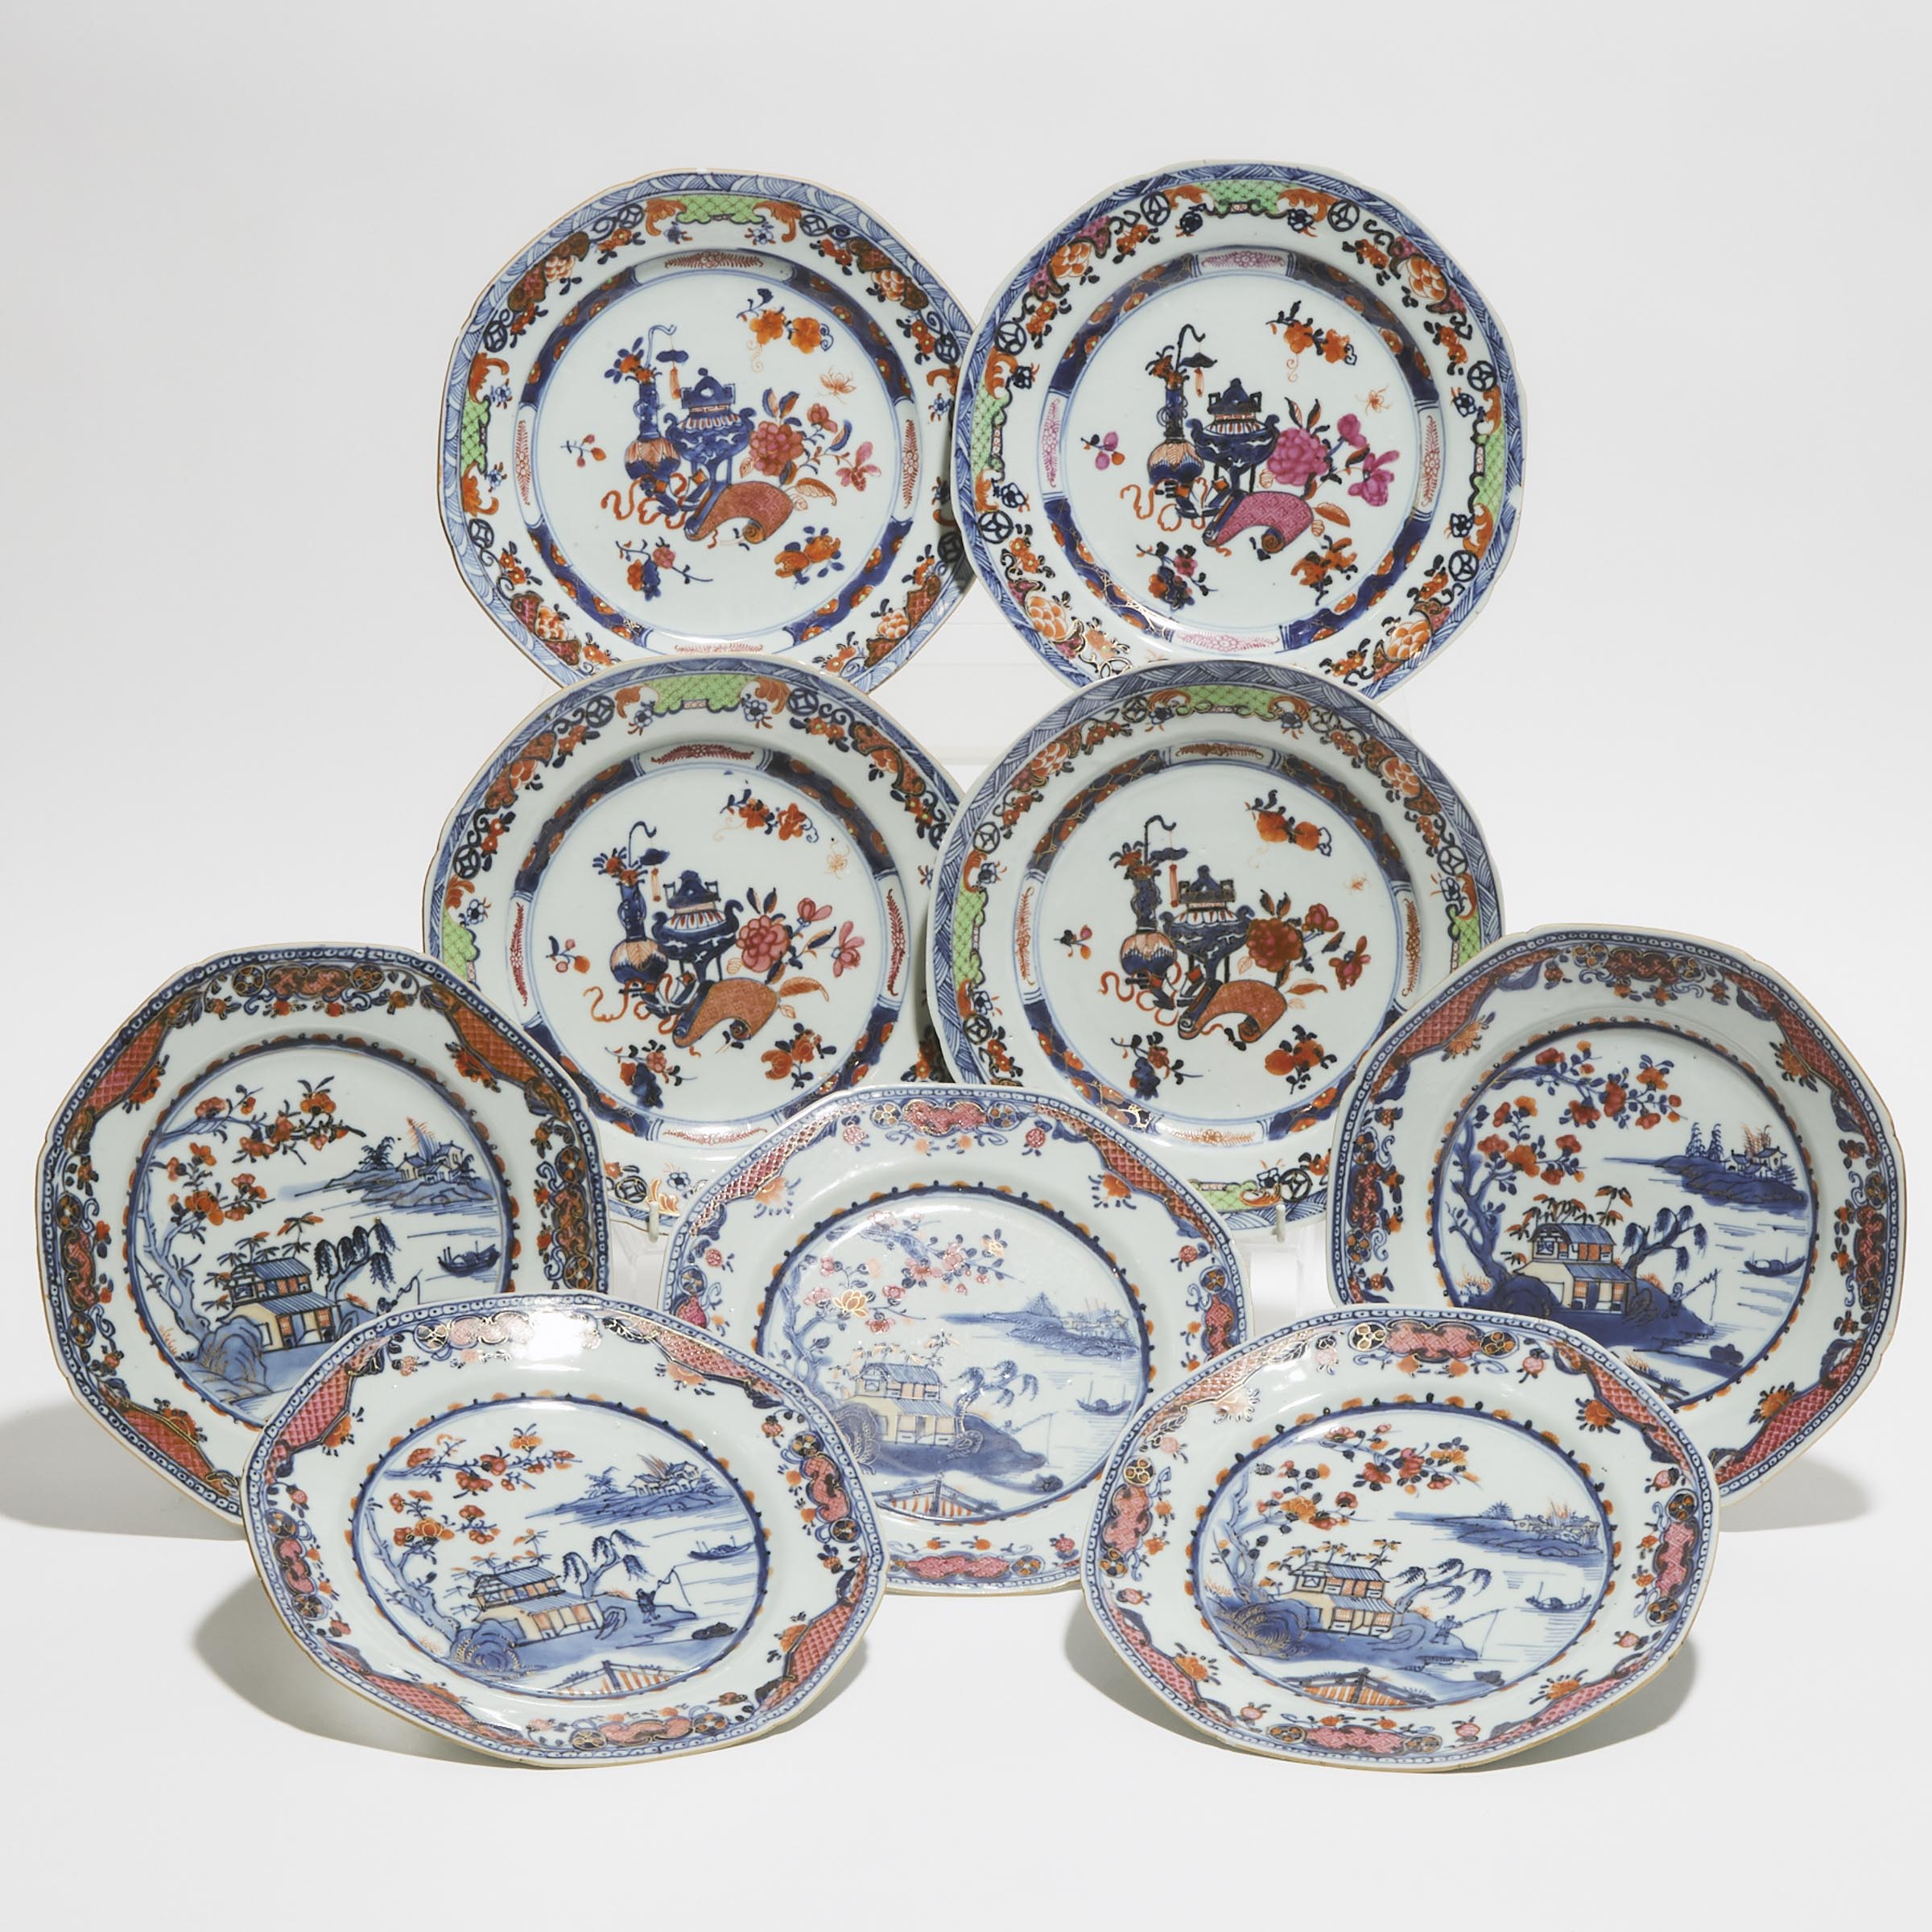 A Set of Five Chinese Imari 'Landscape' Dishes, together with a Set of Four 'Antiques' Dishes, 18th Century